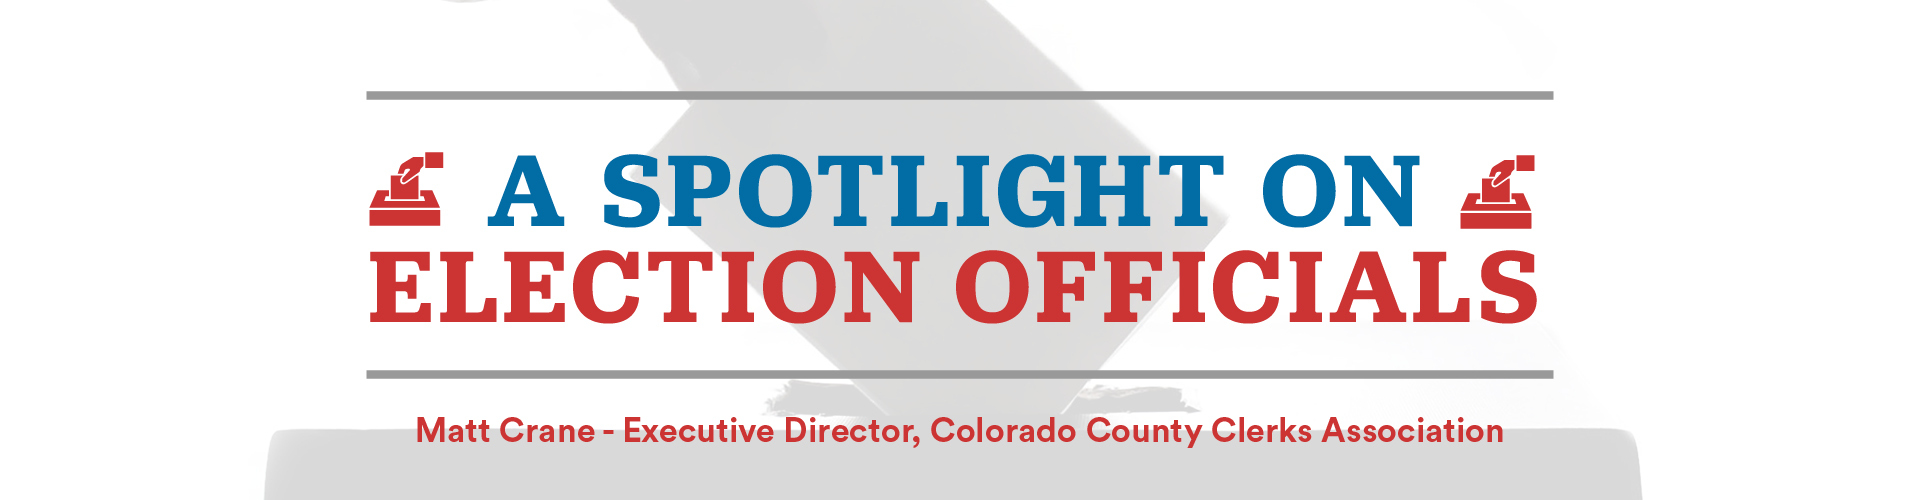 The title of our series is A Spotlight on Election Officials: Matt Crane, Executive Director of the Colorado County Clerks Association